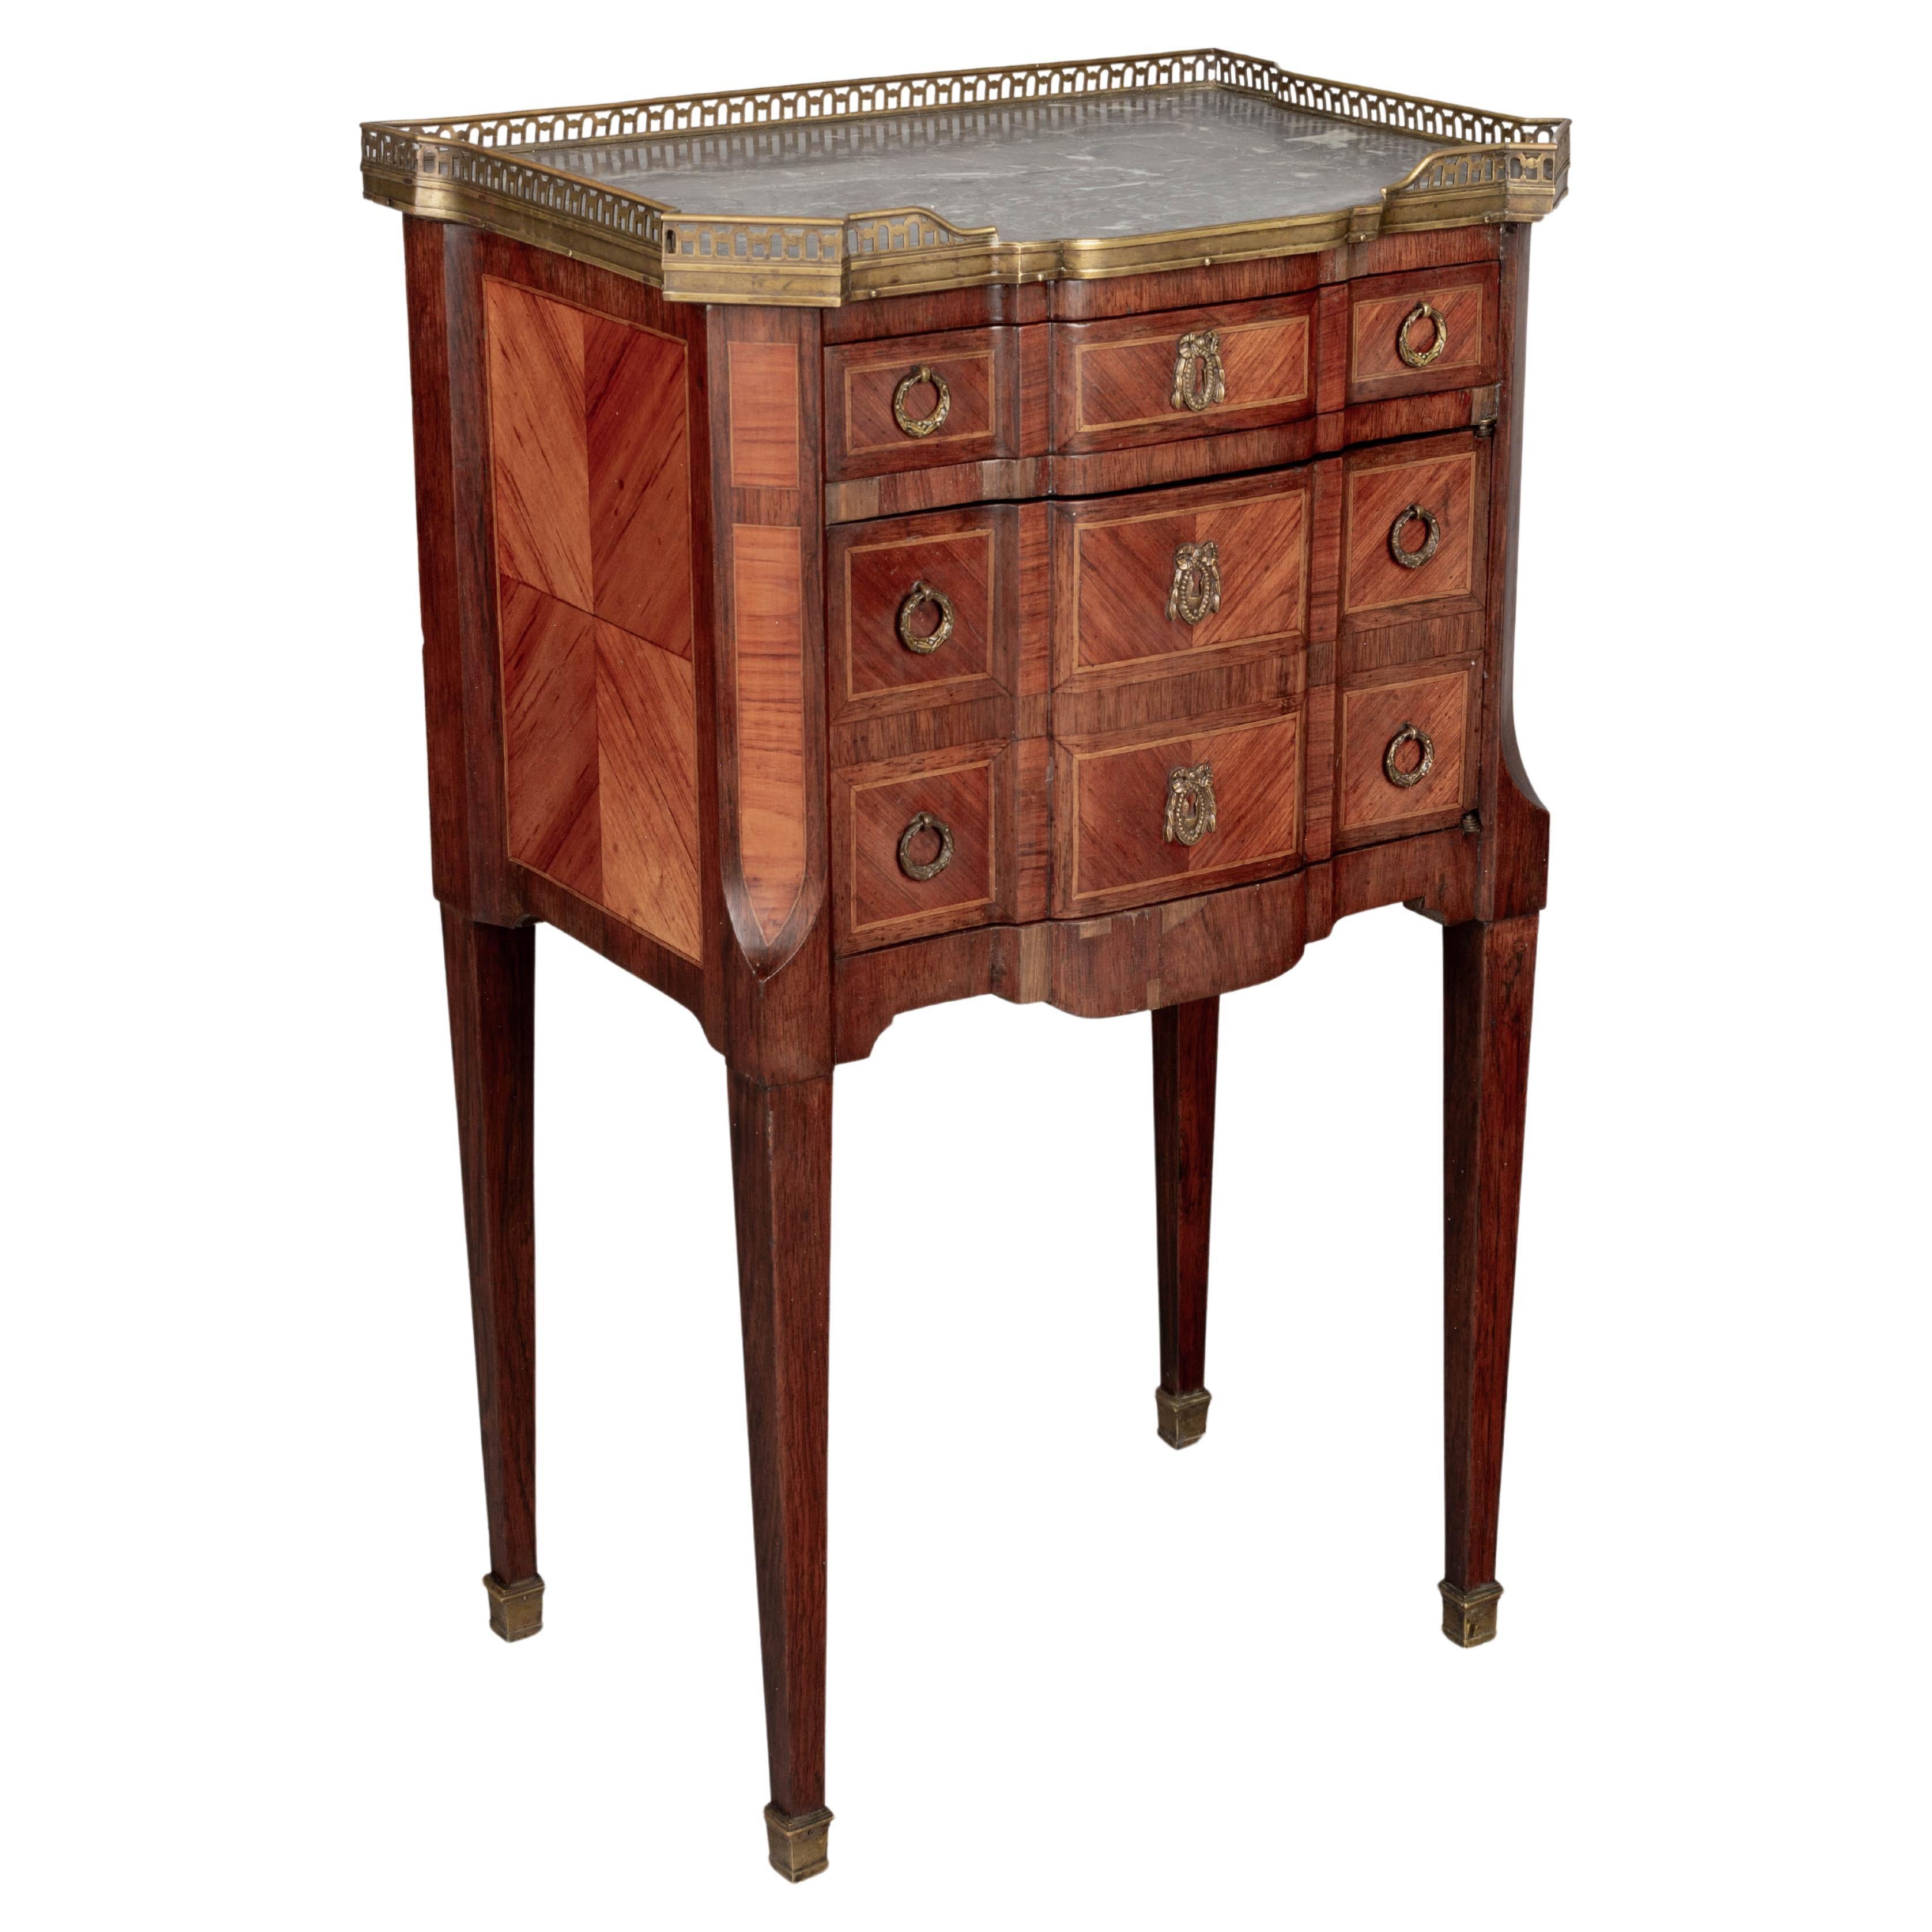 Louis XVI Style Marble Top Nightstand or Side Table